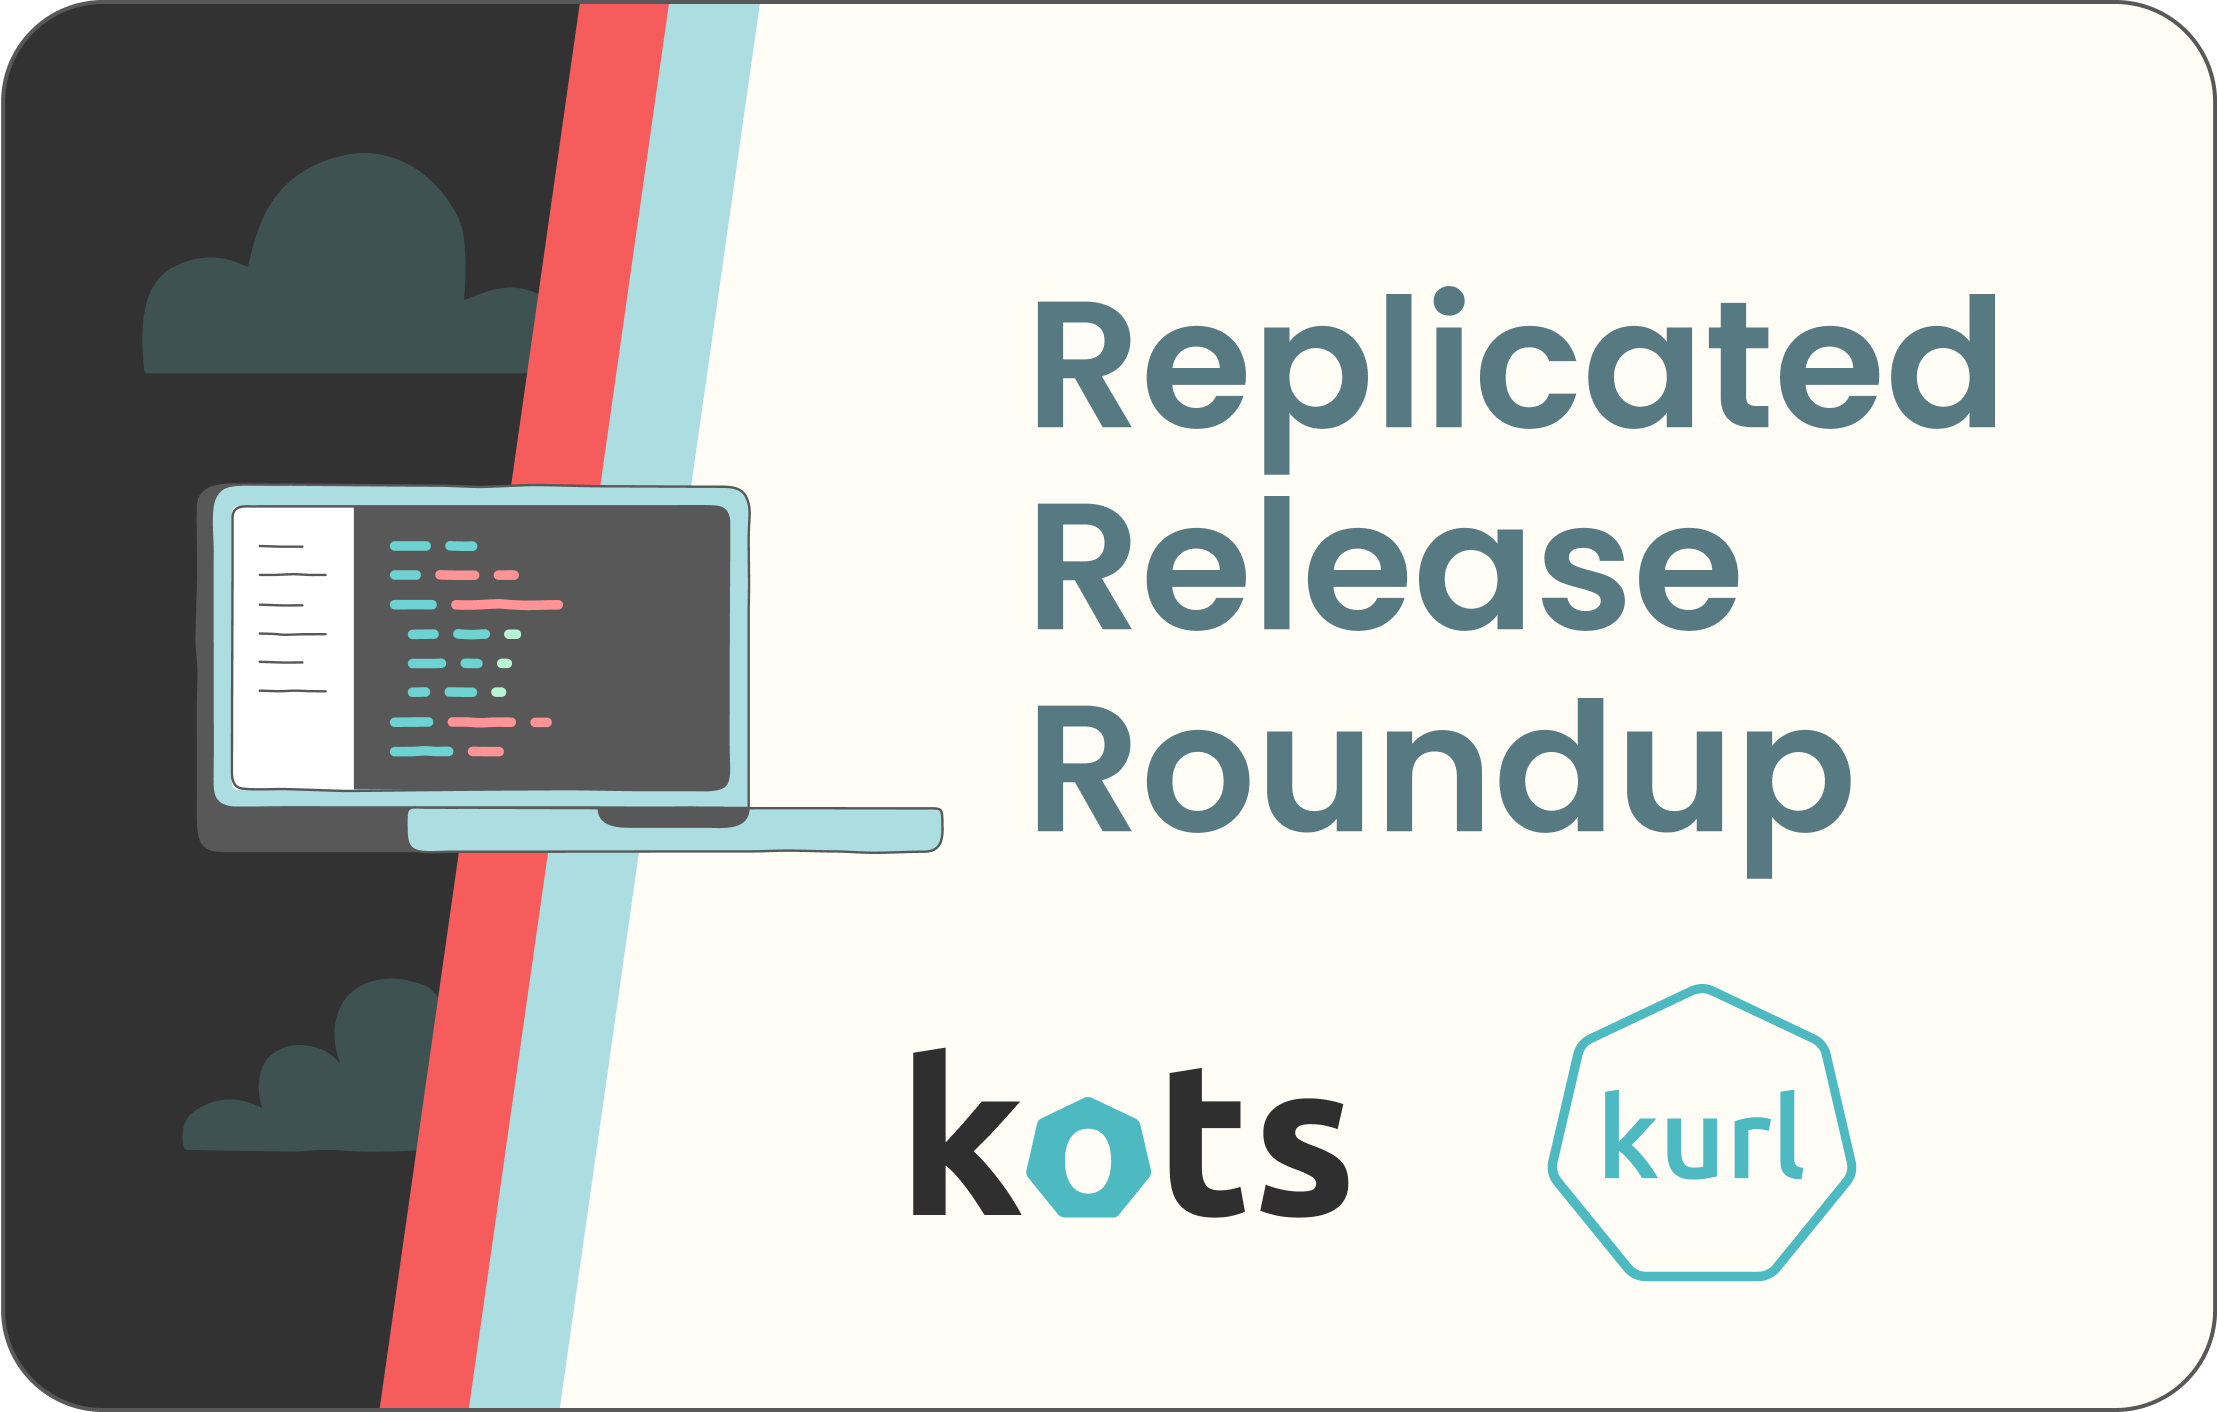 Replicated Release Roundup